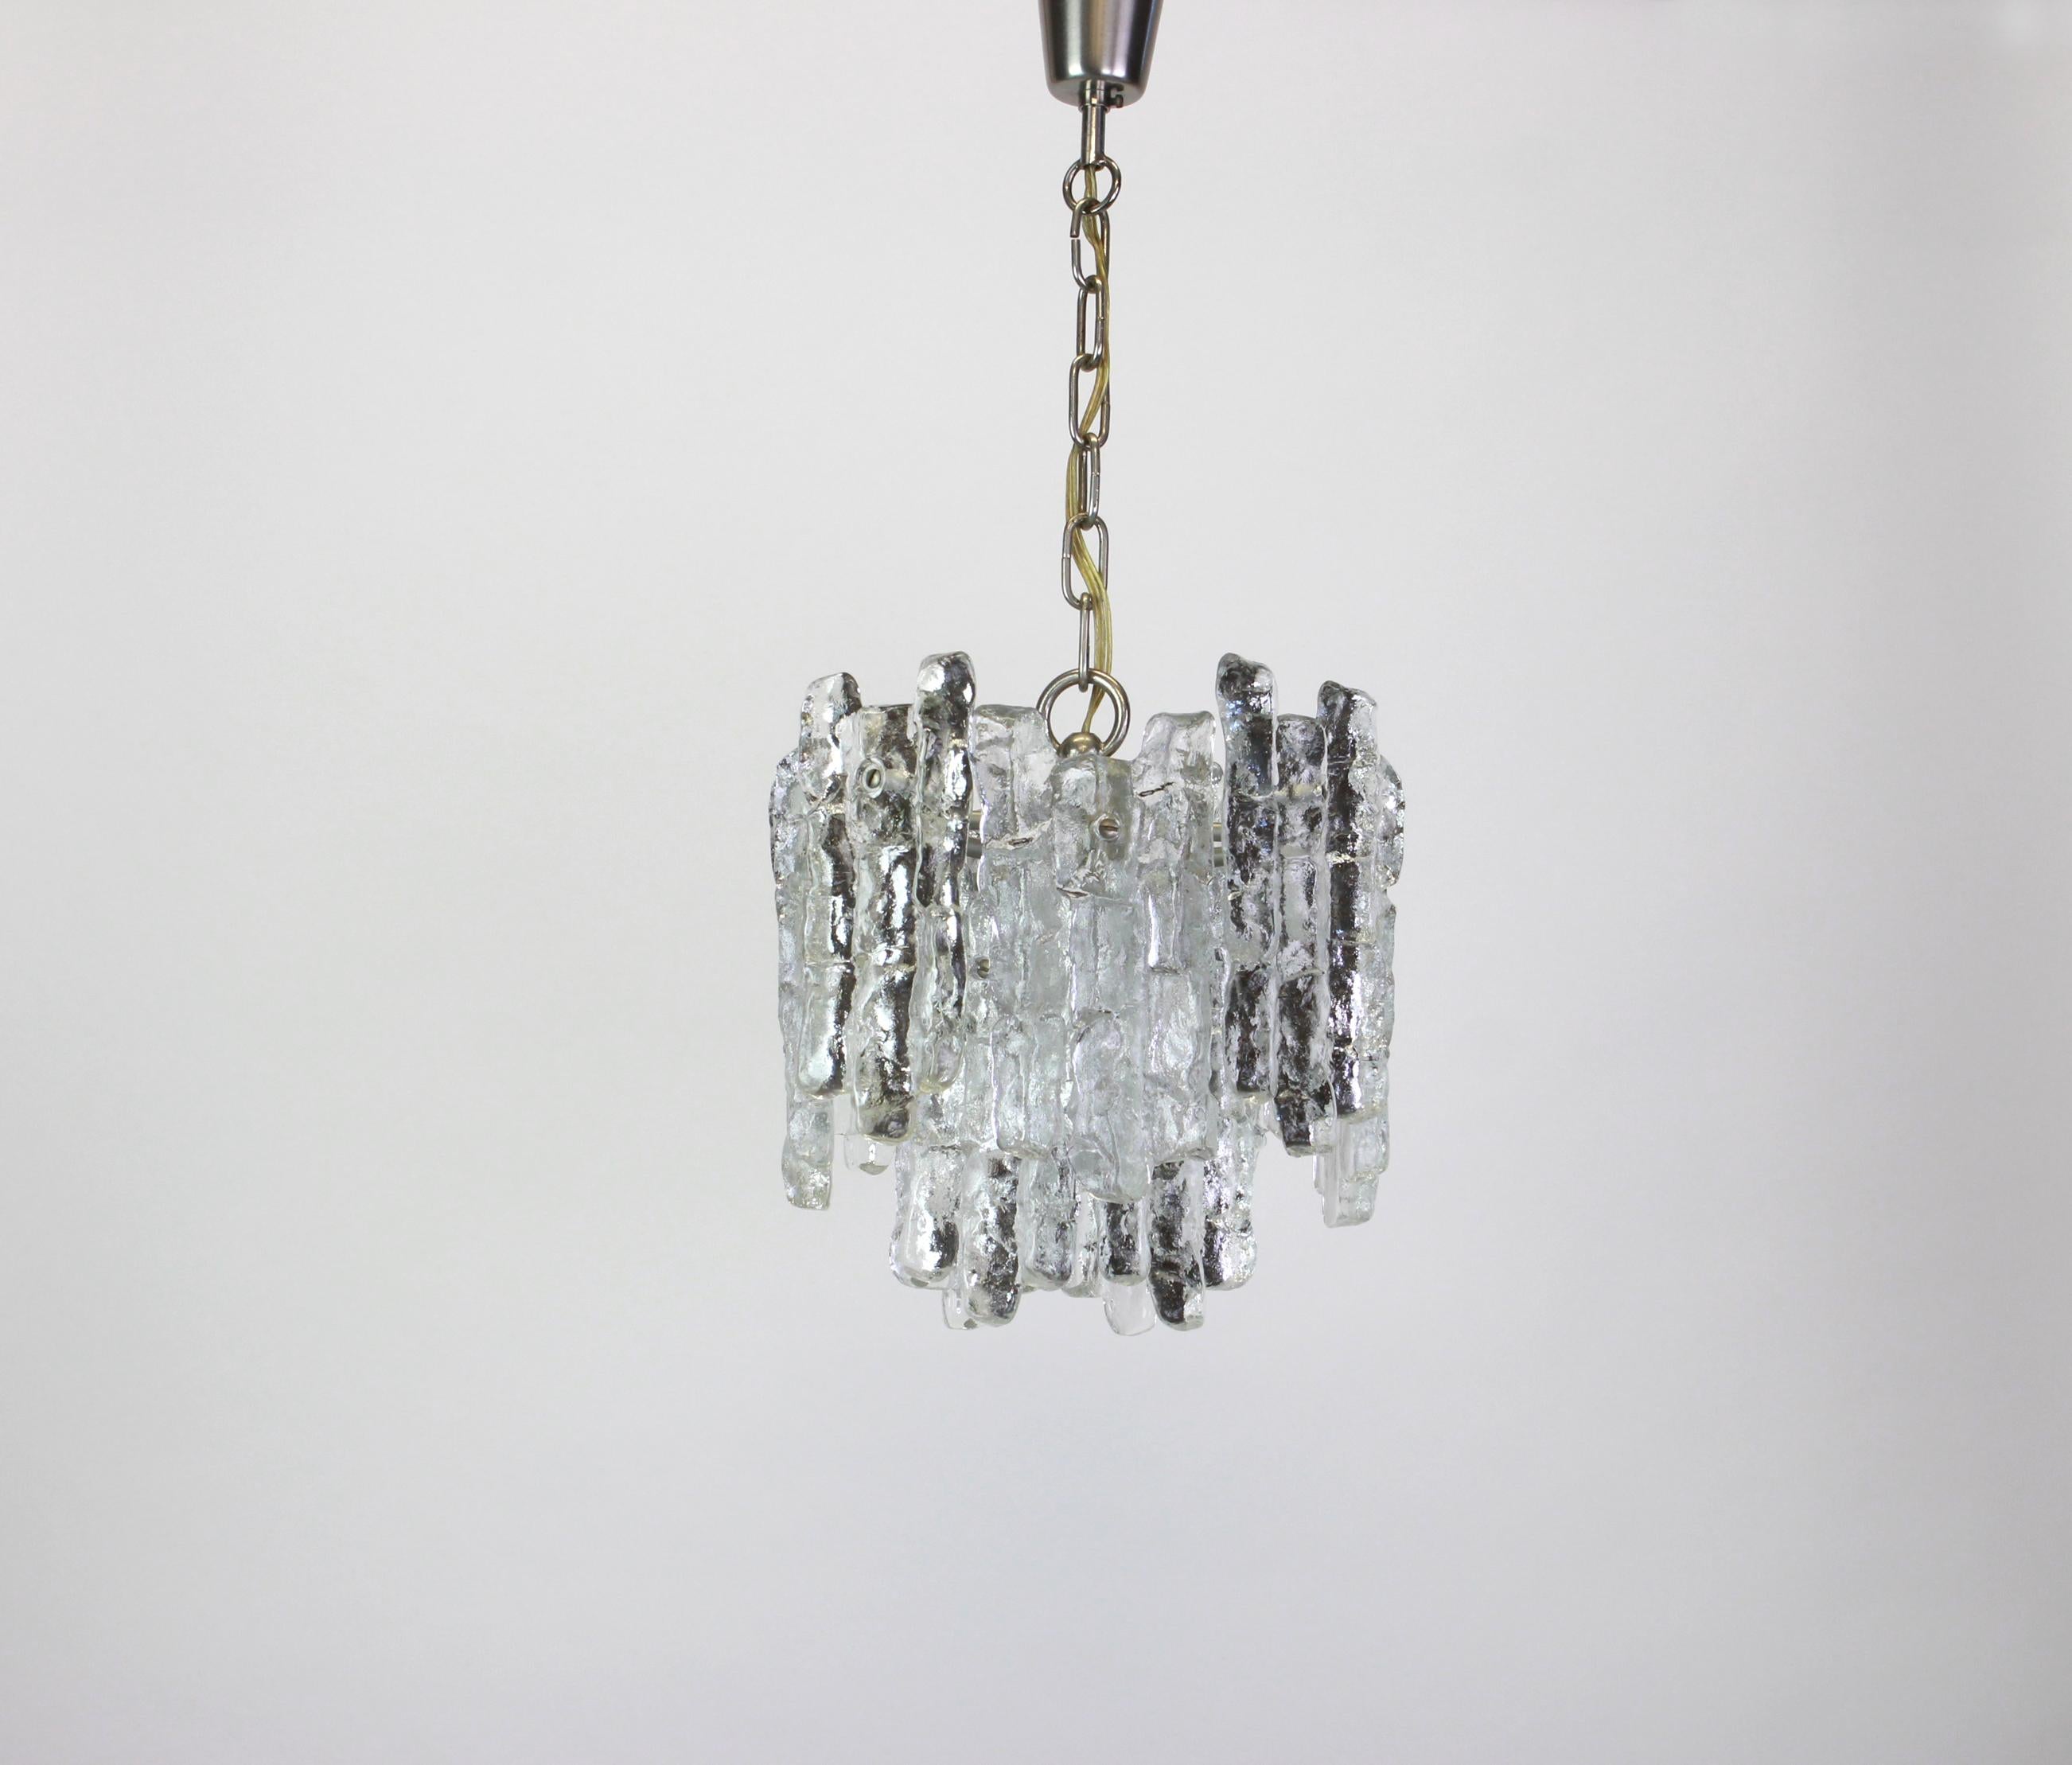 Stunning pair of Murano glass pendants by Kalmar, 1960s
Two tiers structure gathering 12 structured glasses, beautifully refracting the light very heavy quality.

Heavy quality and in very good condition. Cleaned, well-wired and ready to use.